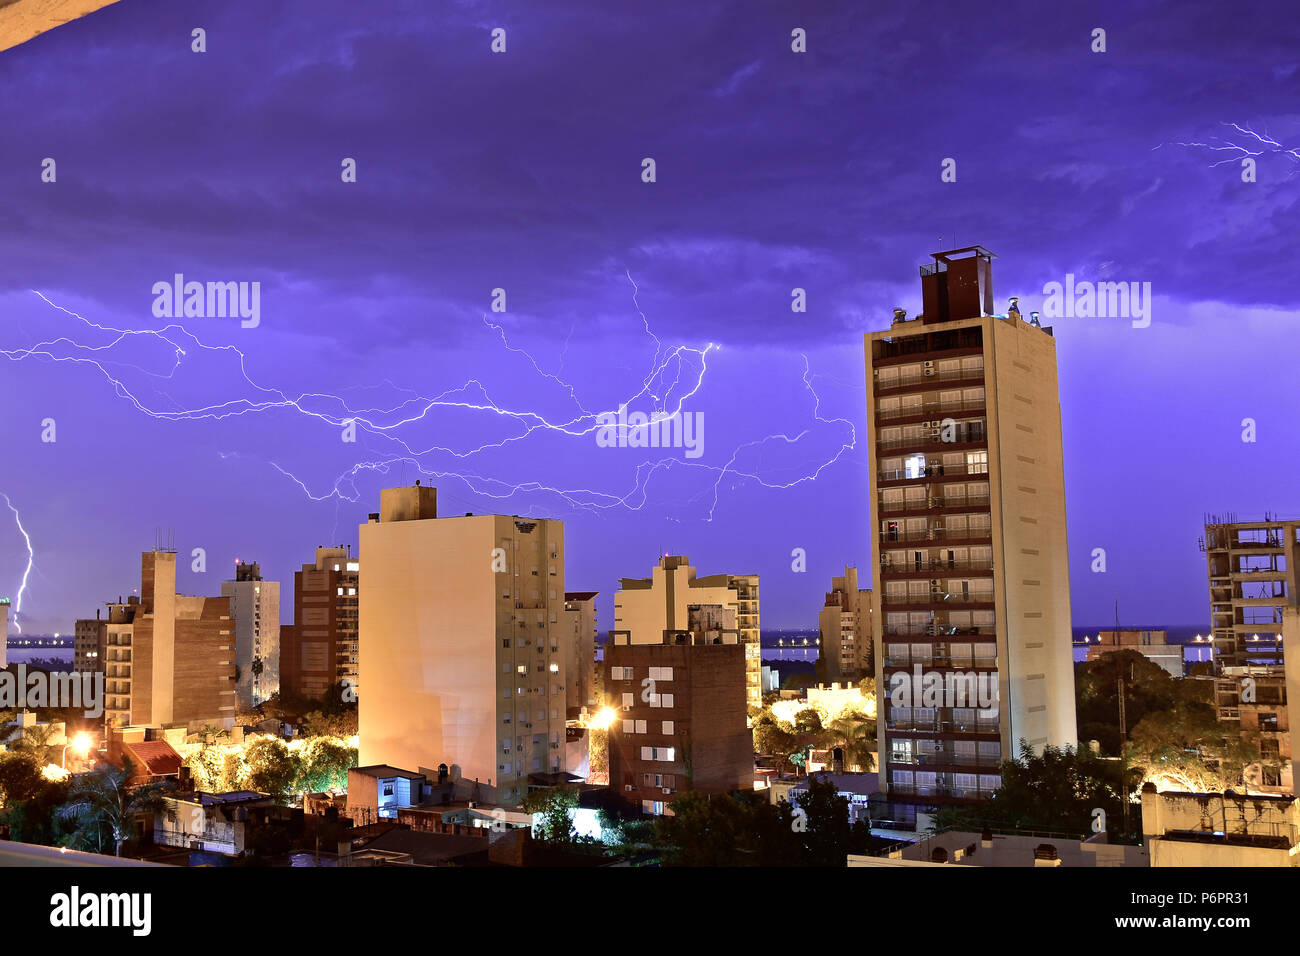 Electrical storm with lots of thunders bolts and lightnings in my neighborhood Stock Photo